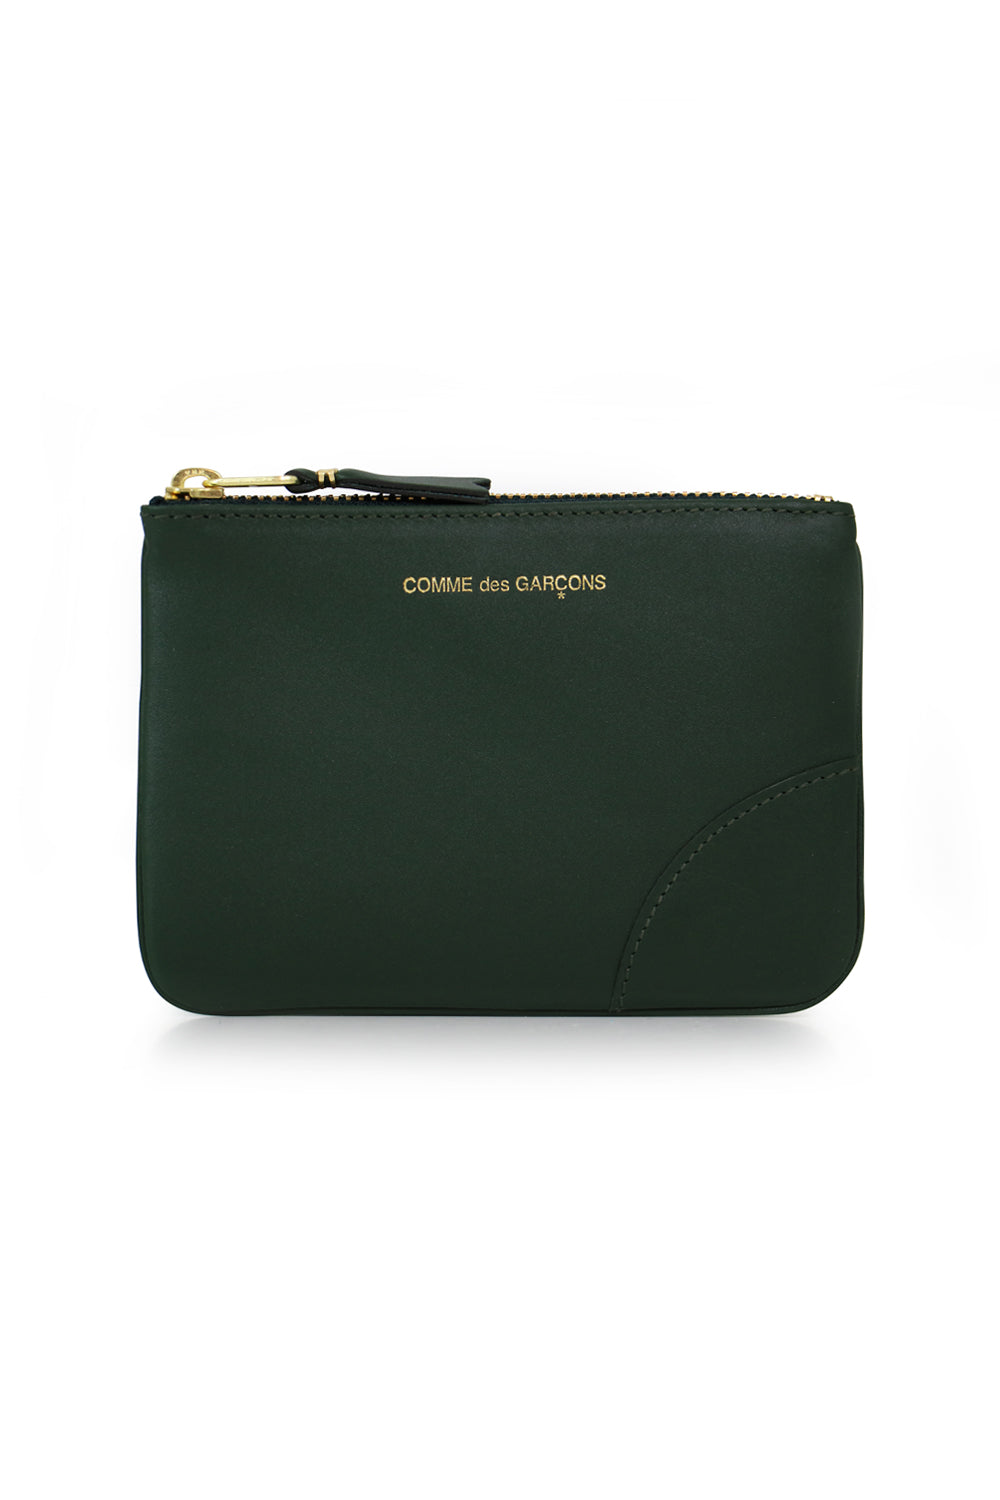 COMME DES GARCONS BAGS GREEN SMALL CLASSIC LEATHER POUCH | BOTTLE GREEN